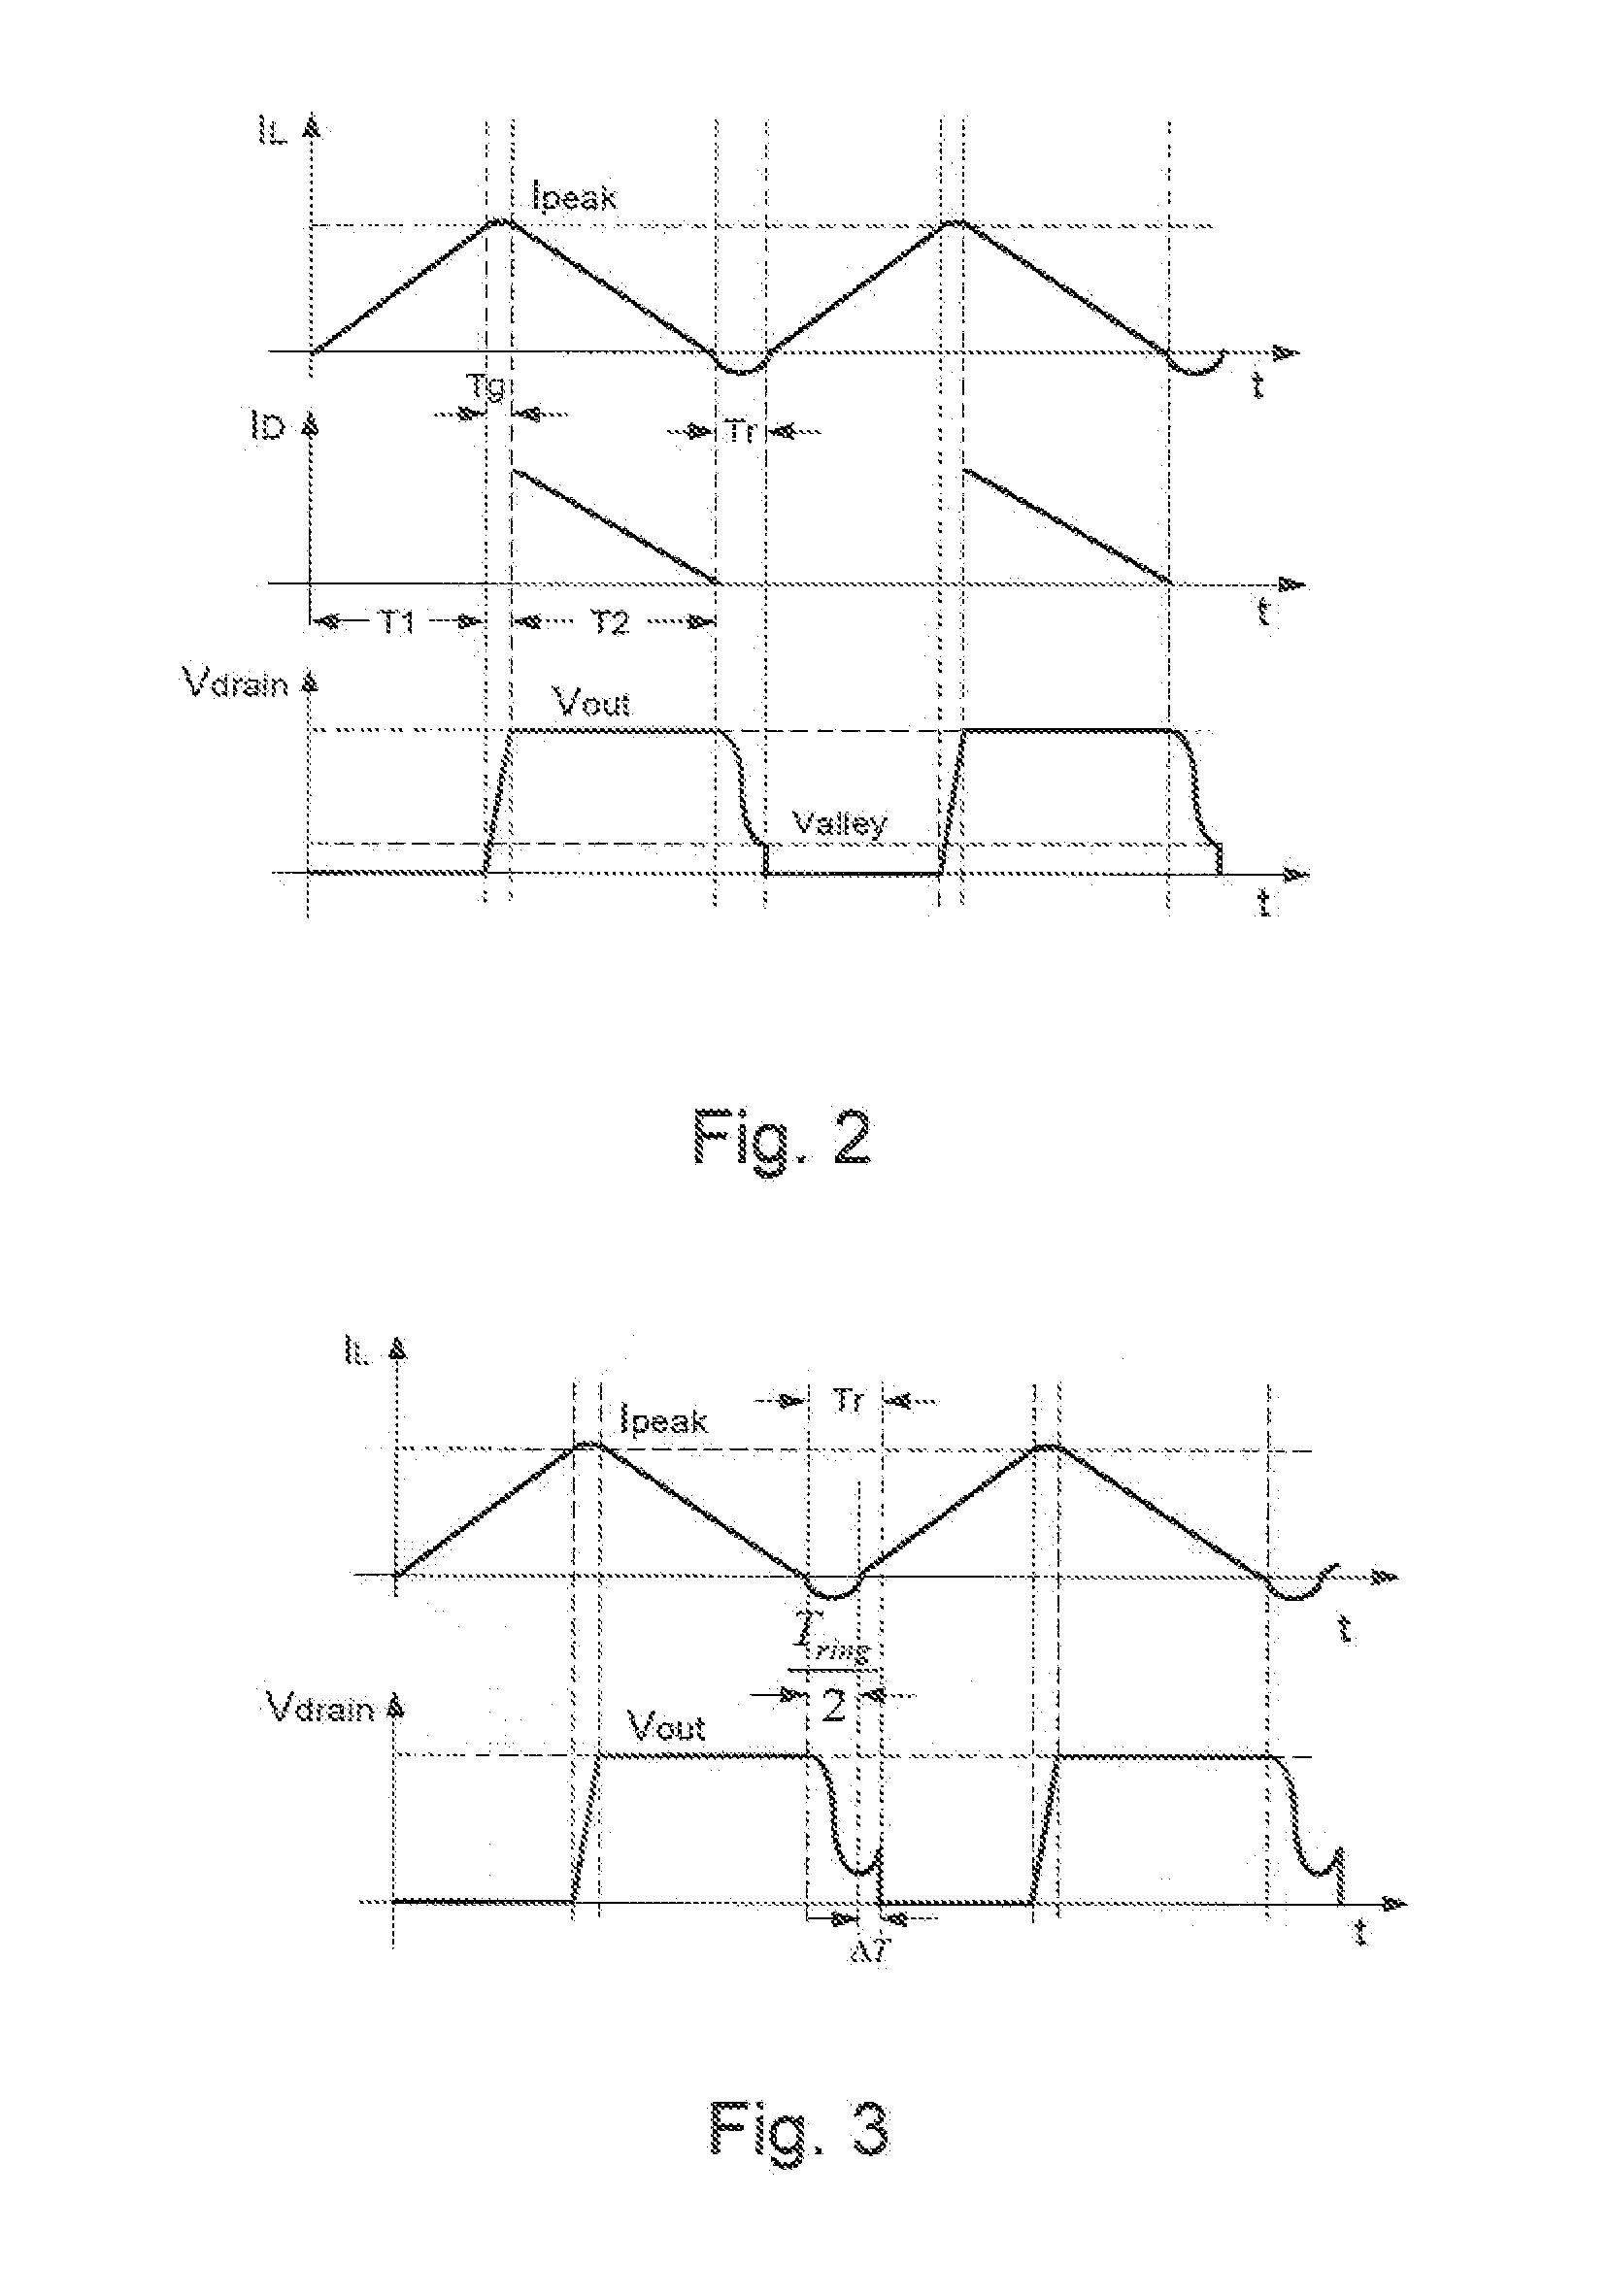 Self-oscillating switched mode converter with valley detection